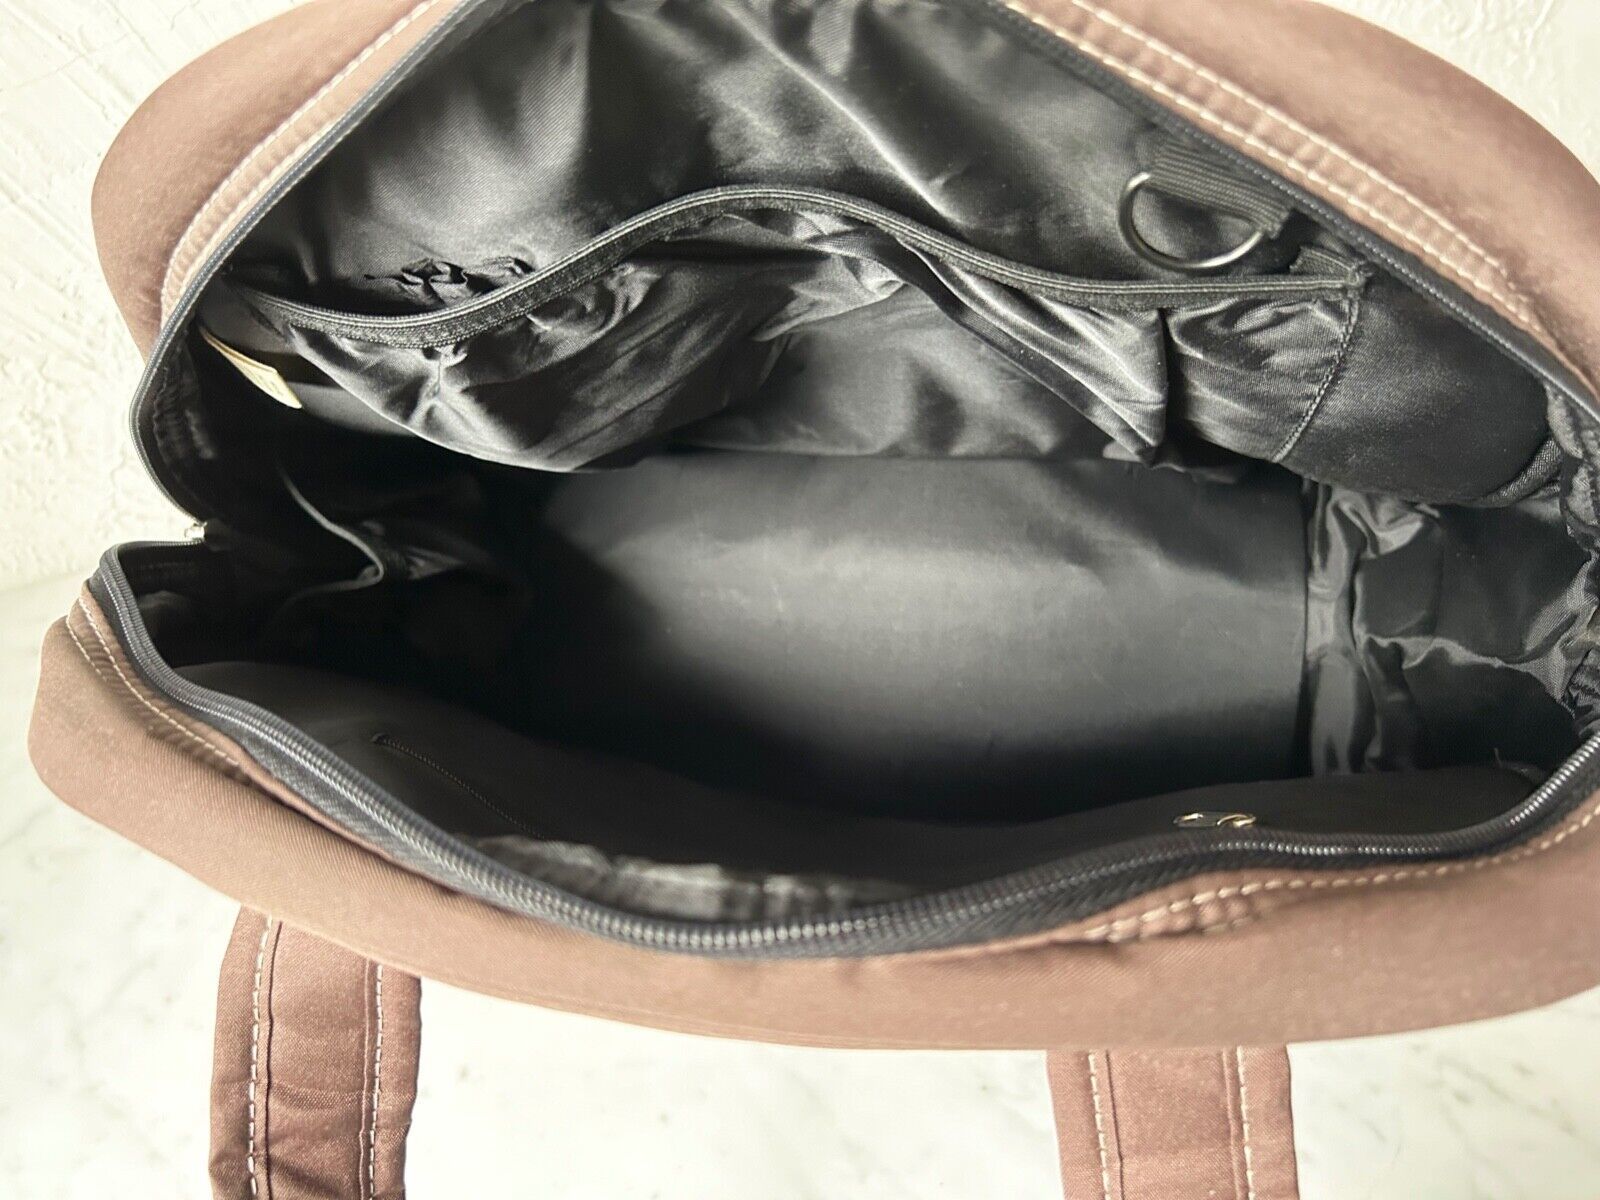 Gaiam Brown Quilted Metro Gym Yoga Bag - 7 and 50 similar items